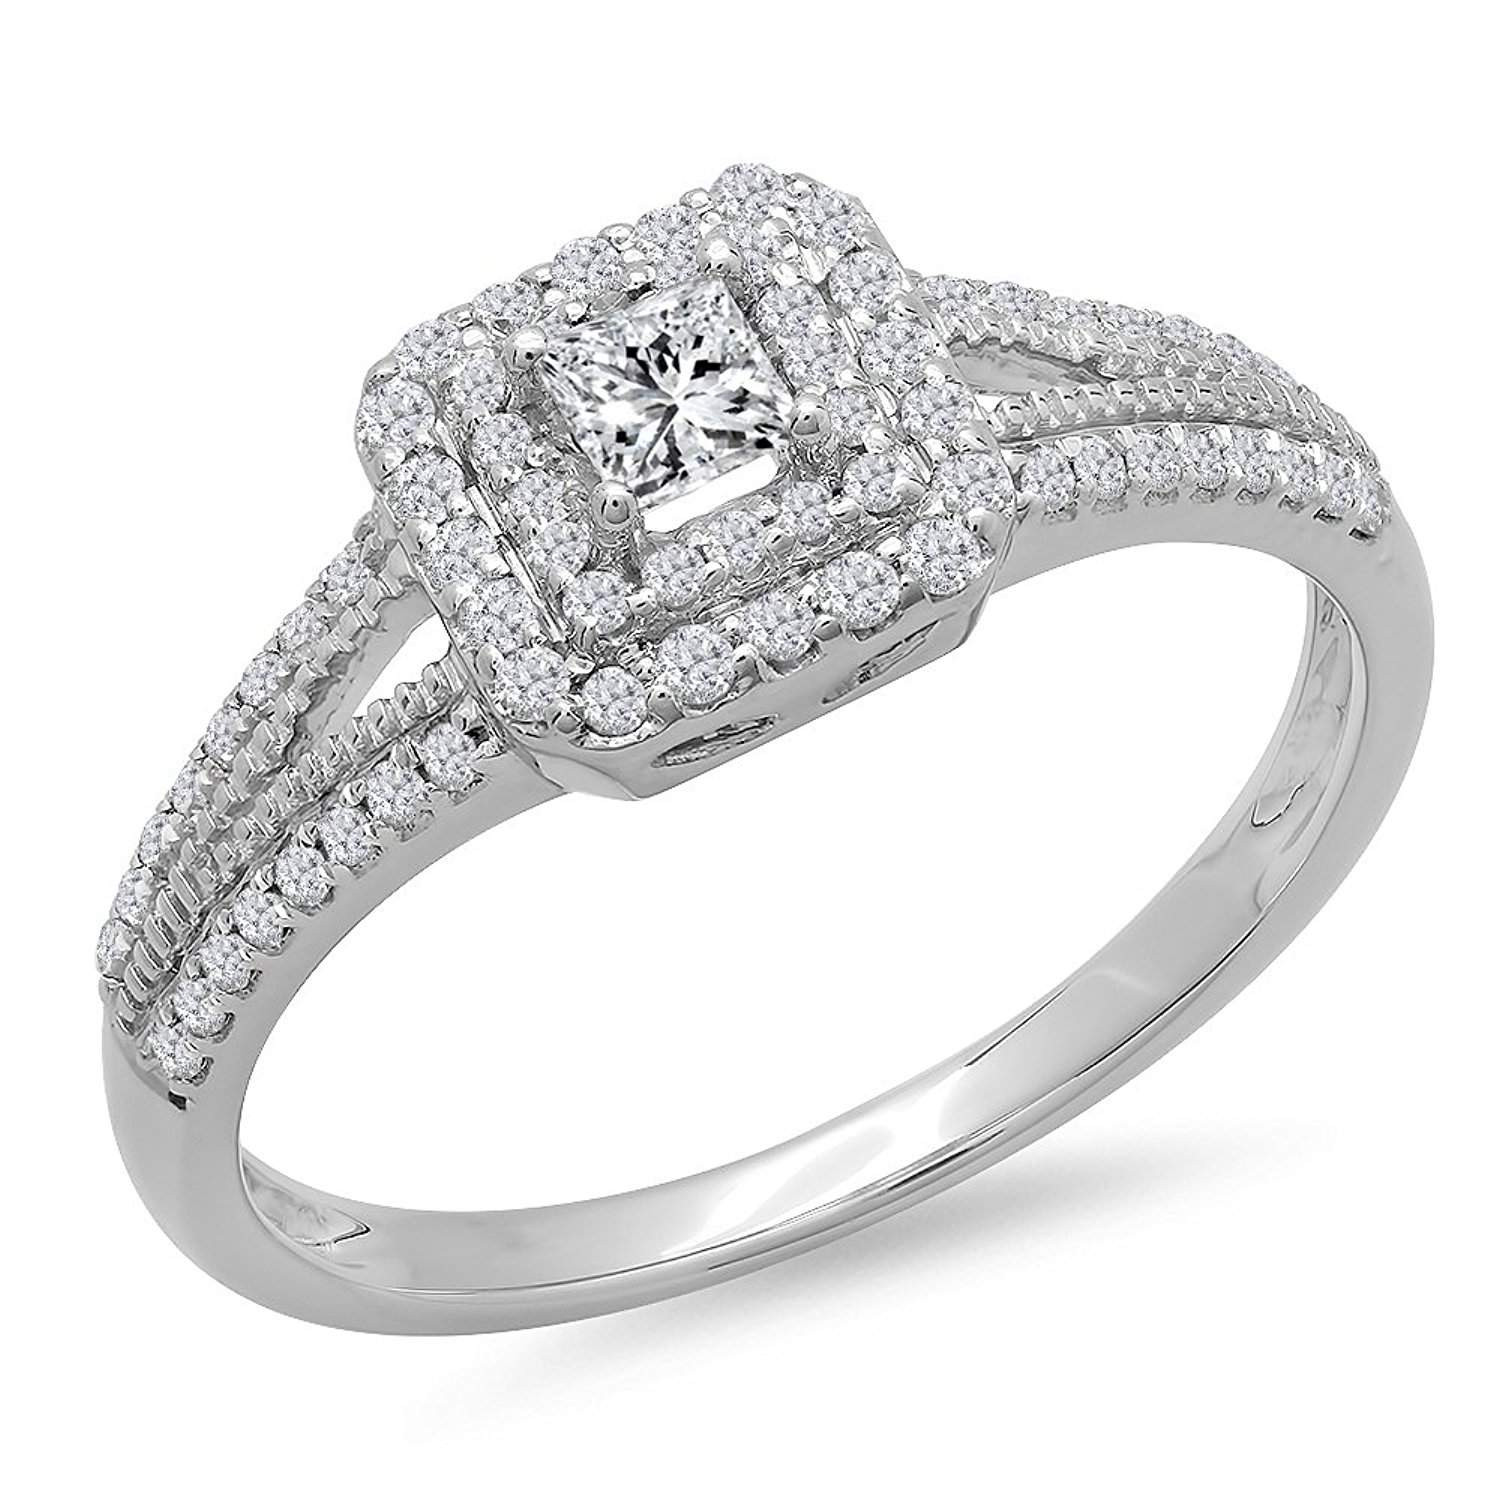 Affordable Diamond Rings
 Top 10 Best Valentine’s Day Deals on Engagement Rings